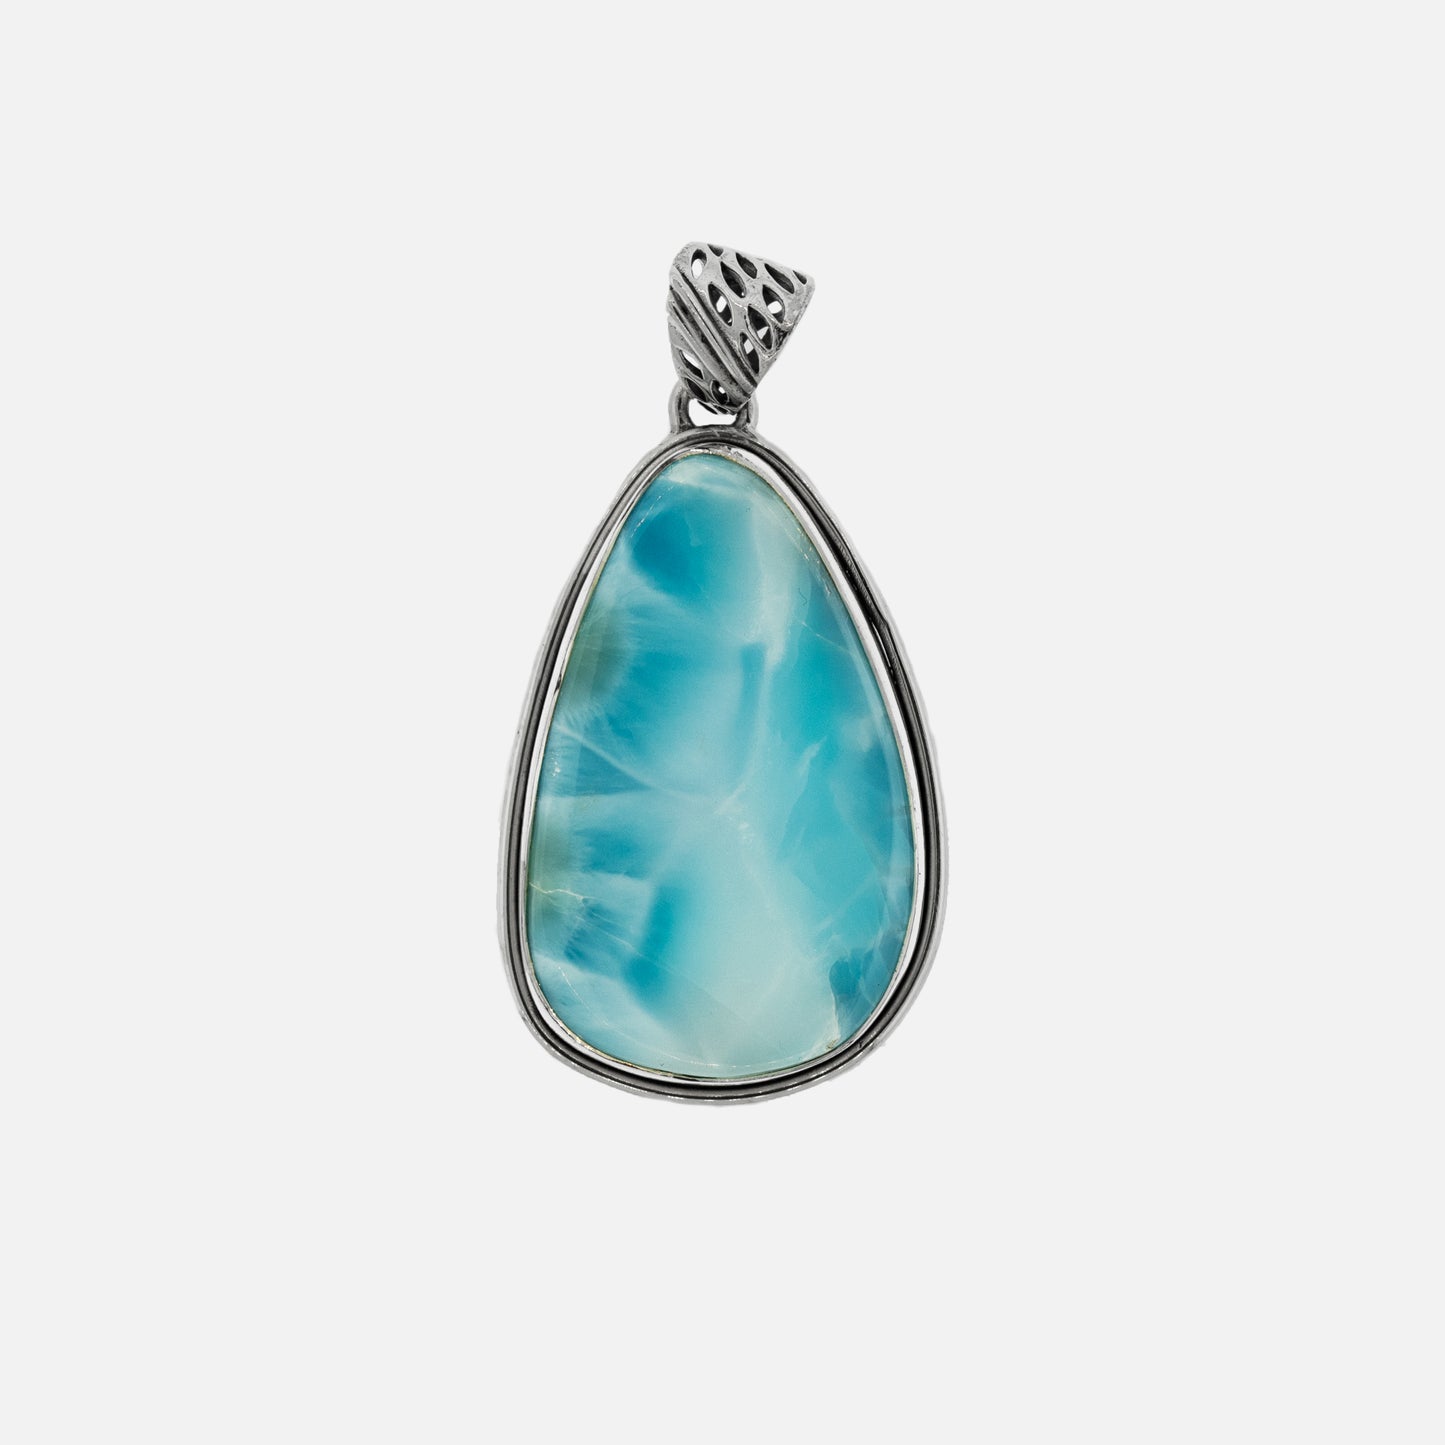 A Medium Larimar Pendant made by Super Silver, featuring a beautiful turquoise stone.